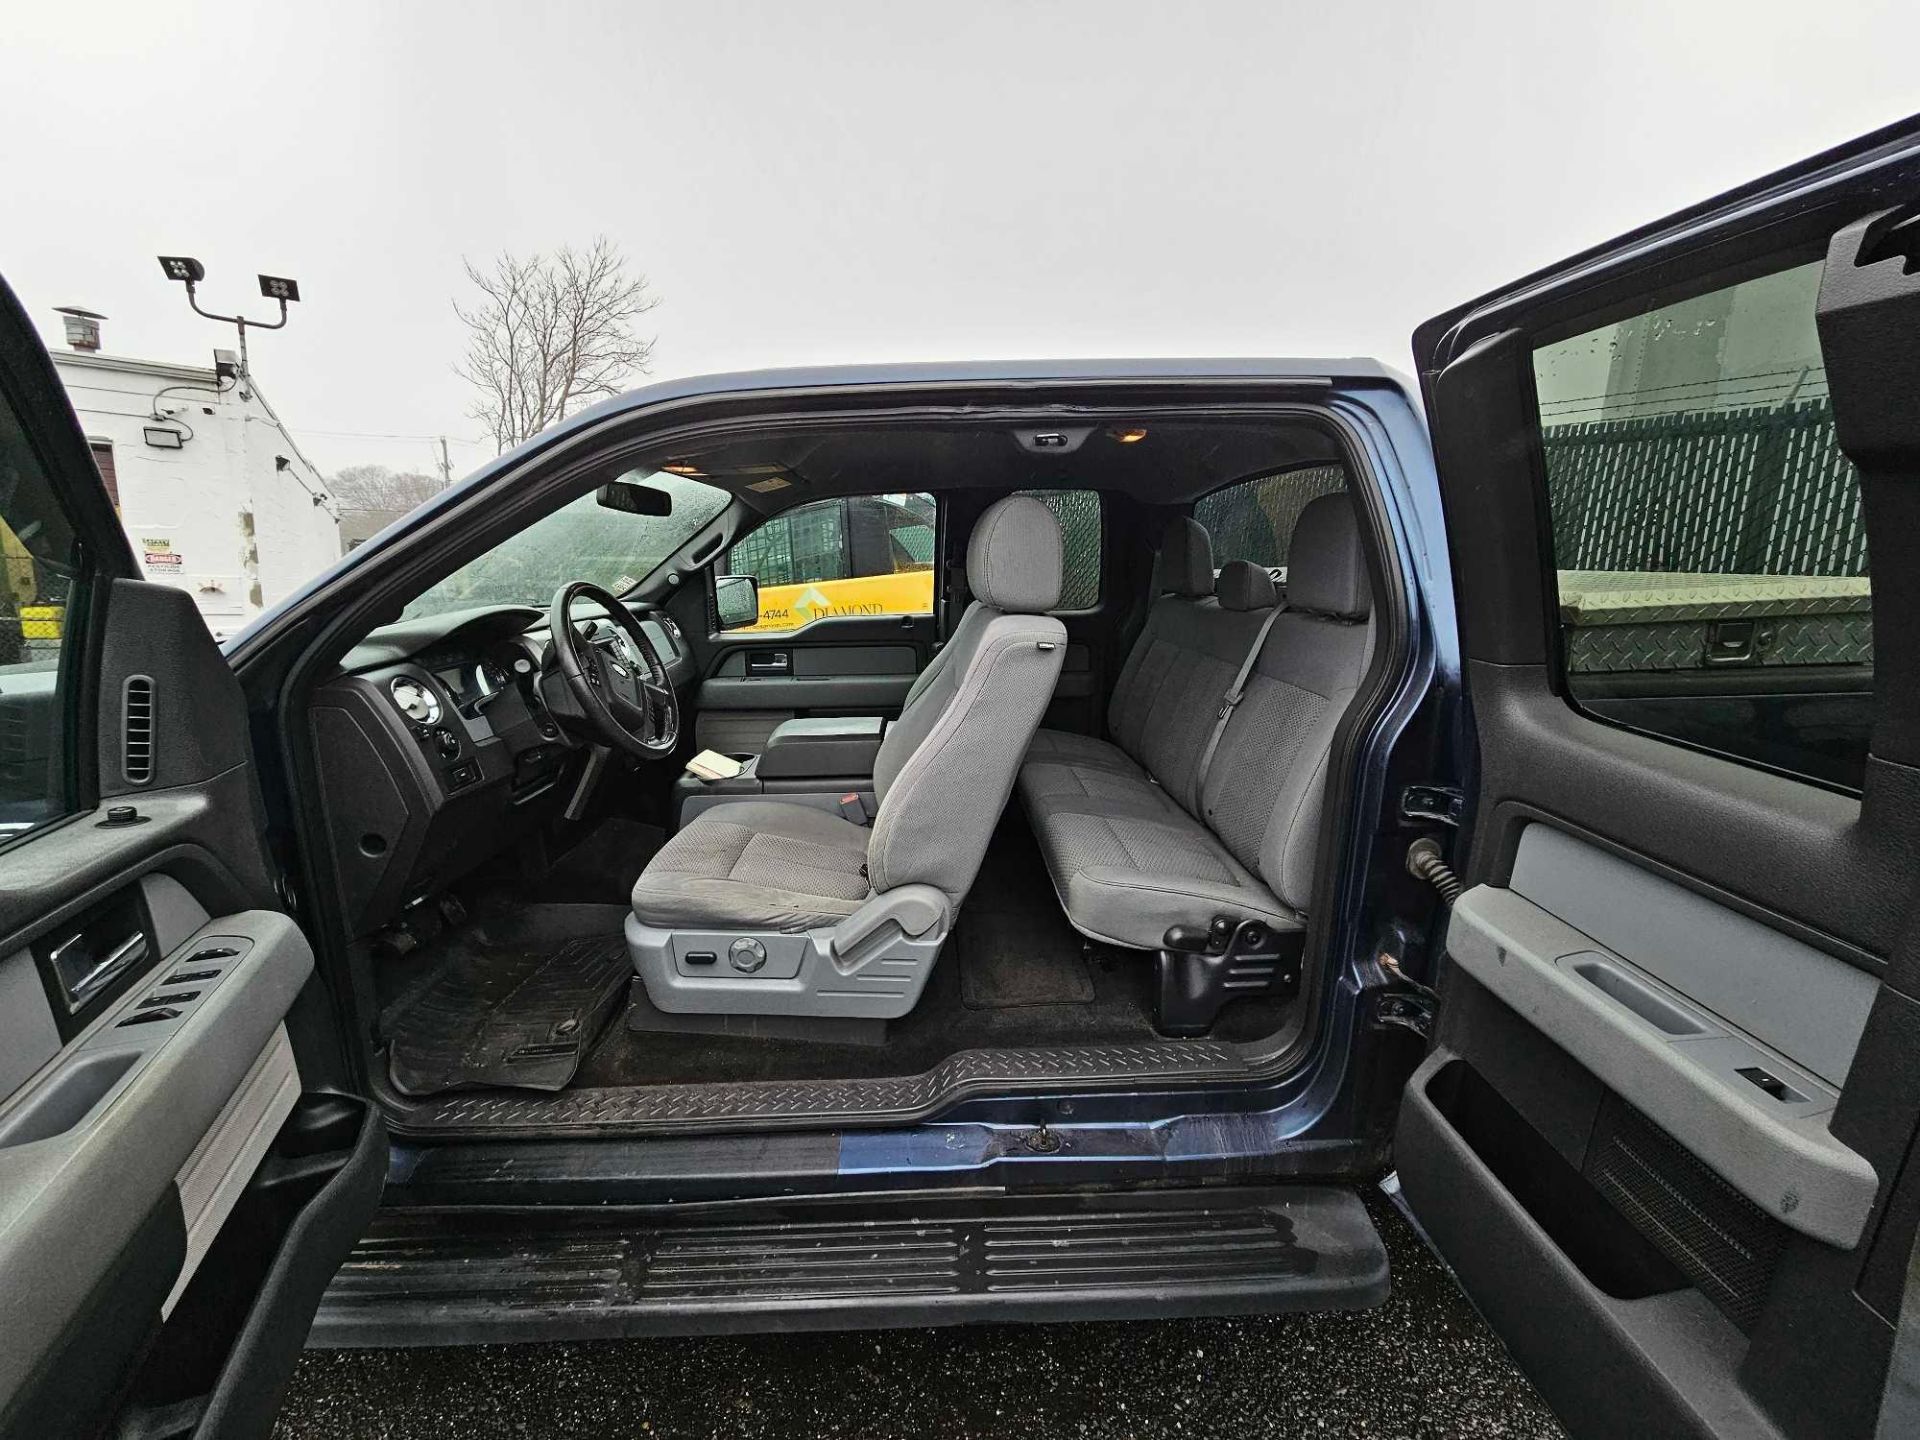 2014 Ford F150 Extended Cab Pickup - Image 7 of 9